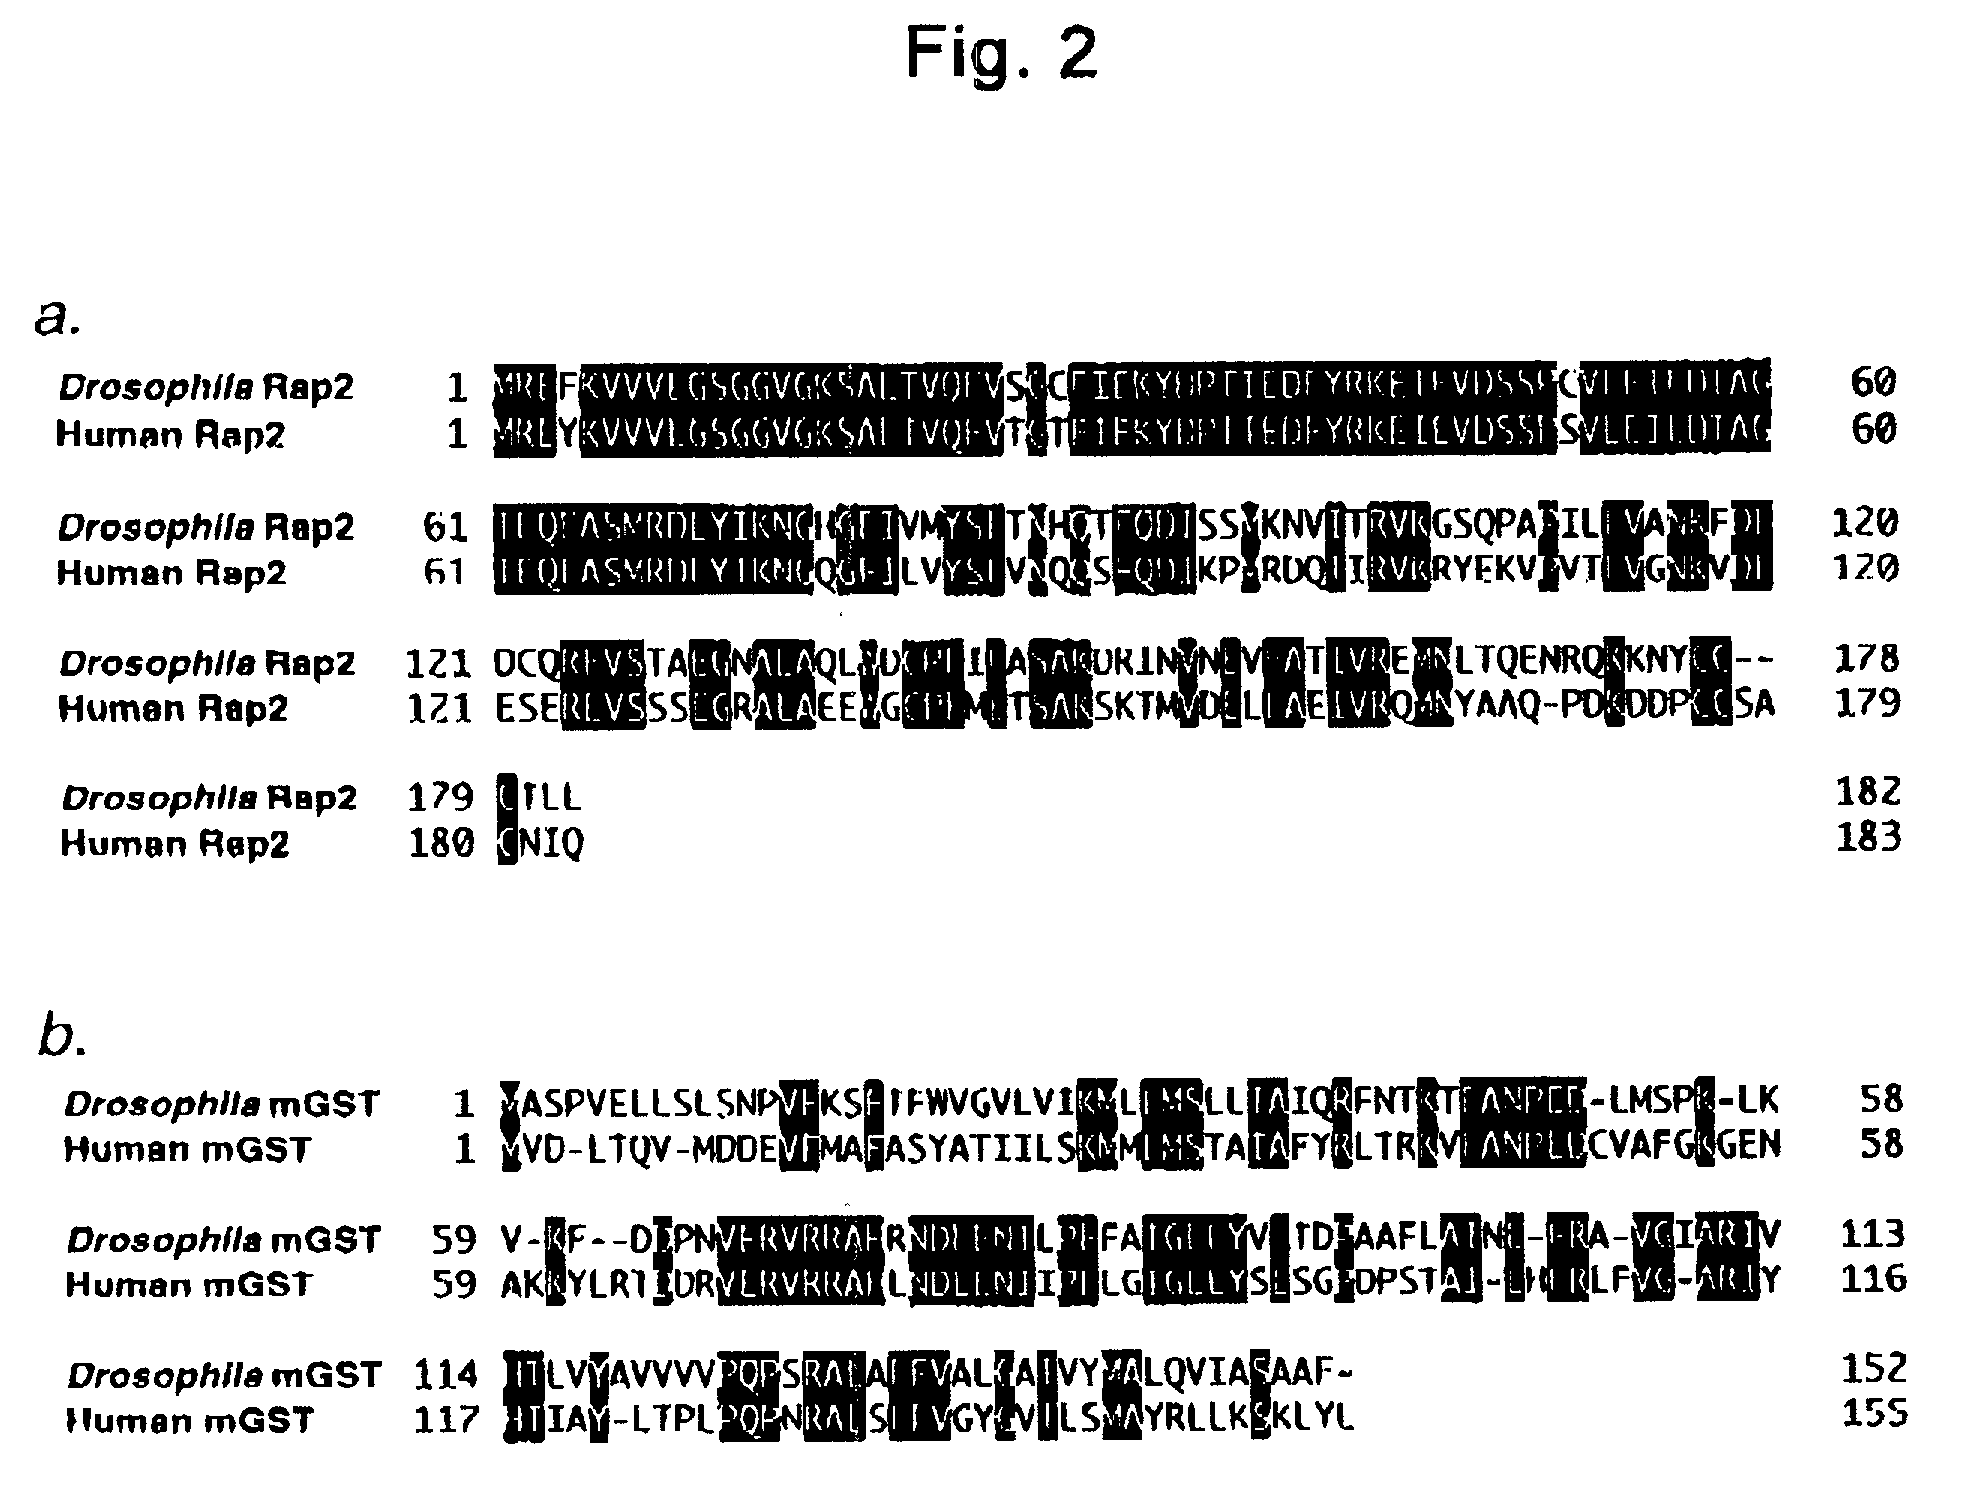 Gene Search Vector and Gene Search Method